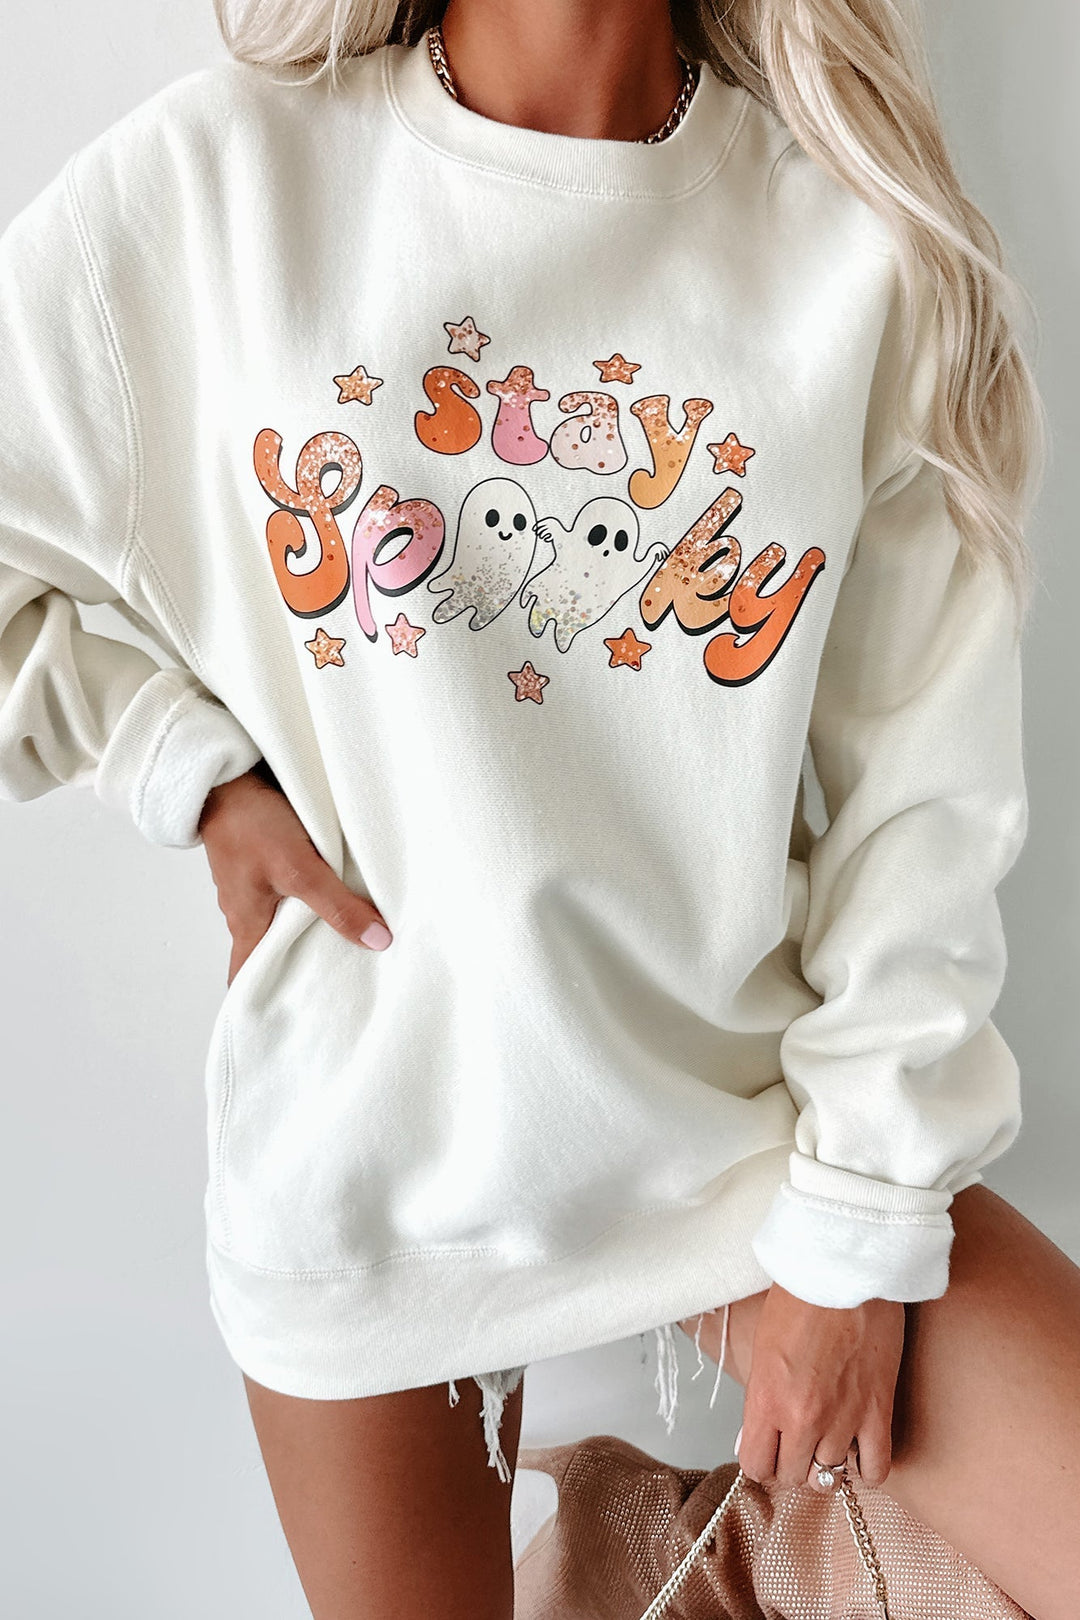 Stay Spooky Friends Heavyweight Graphic Crewneck (knogle)